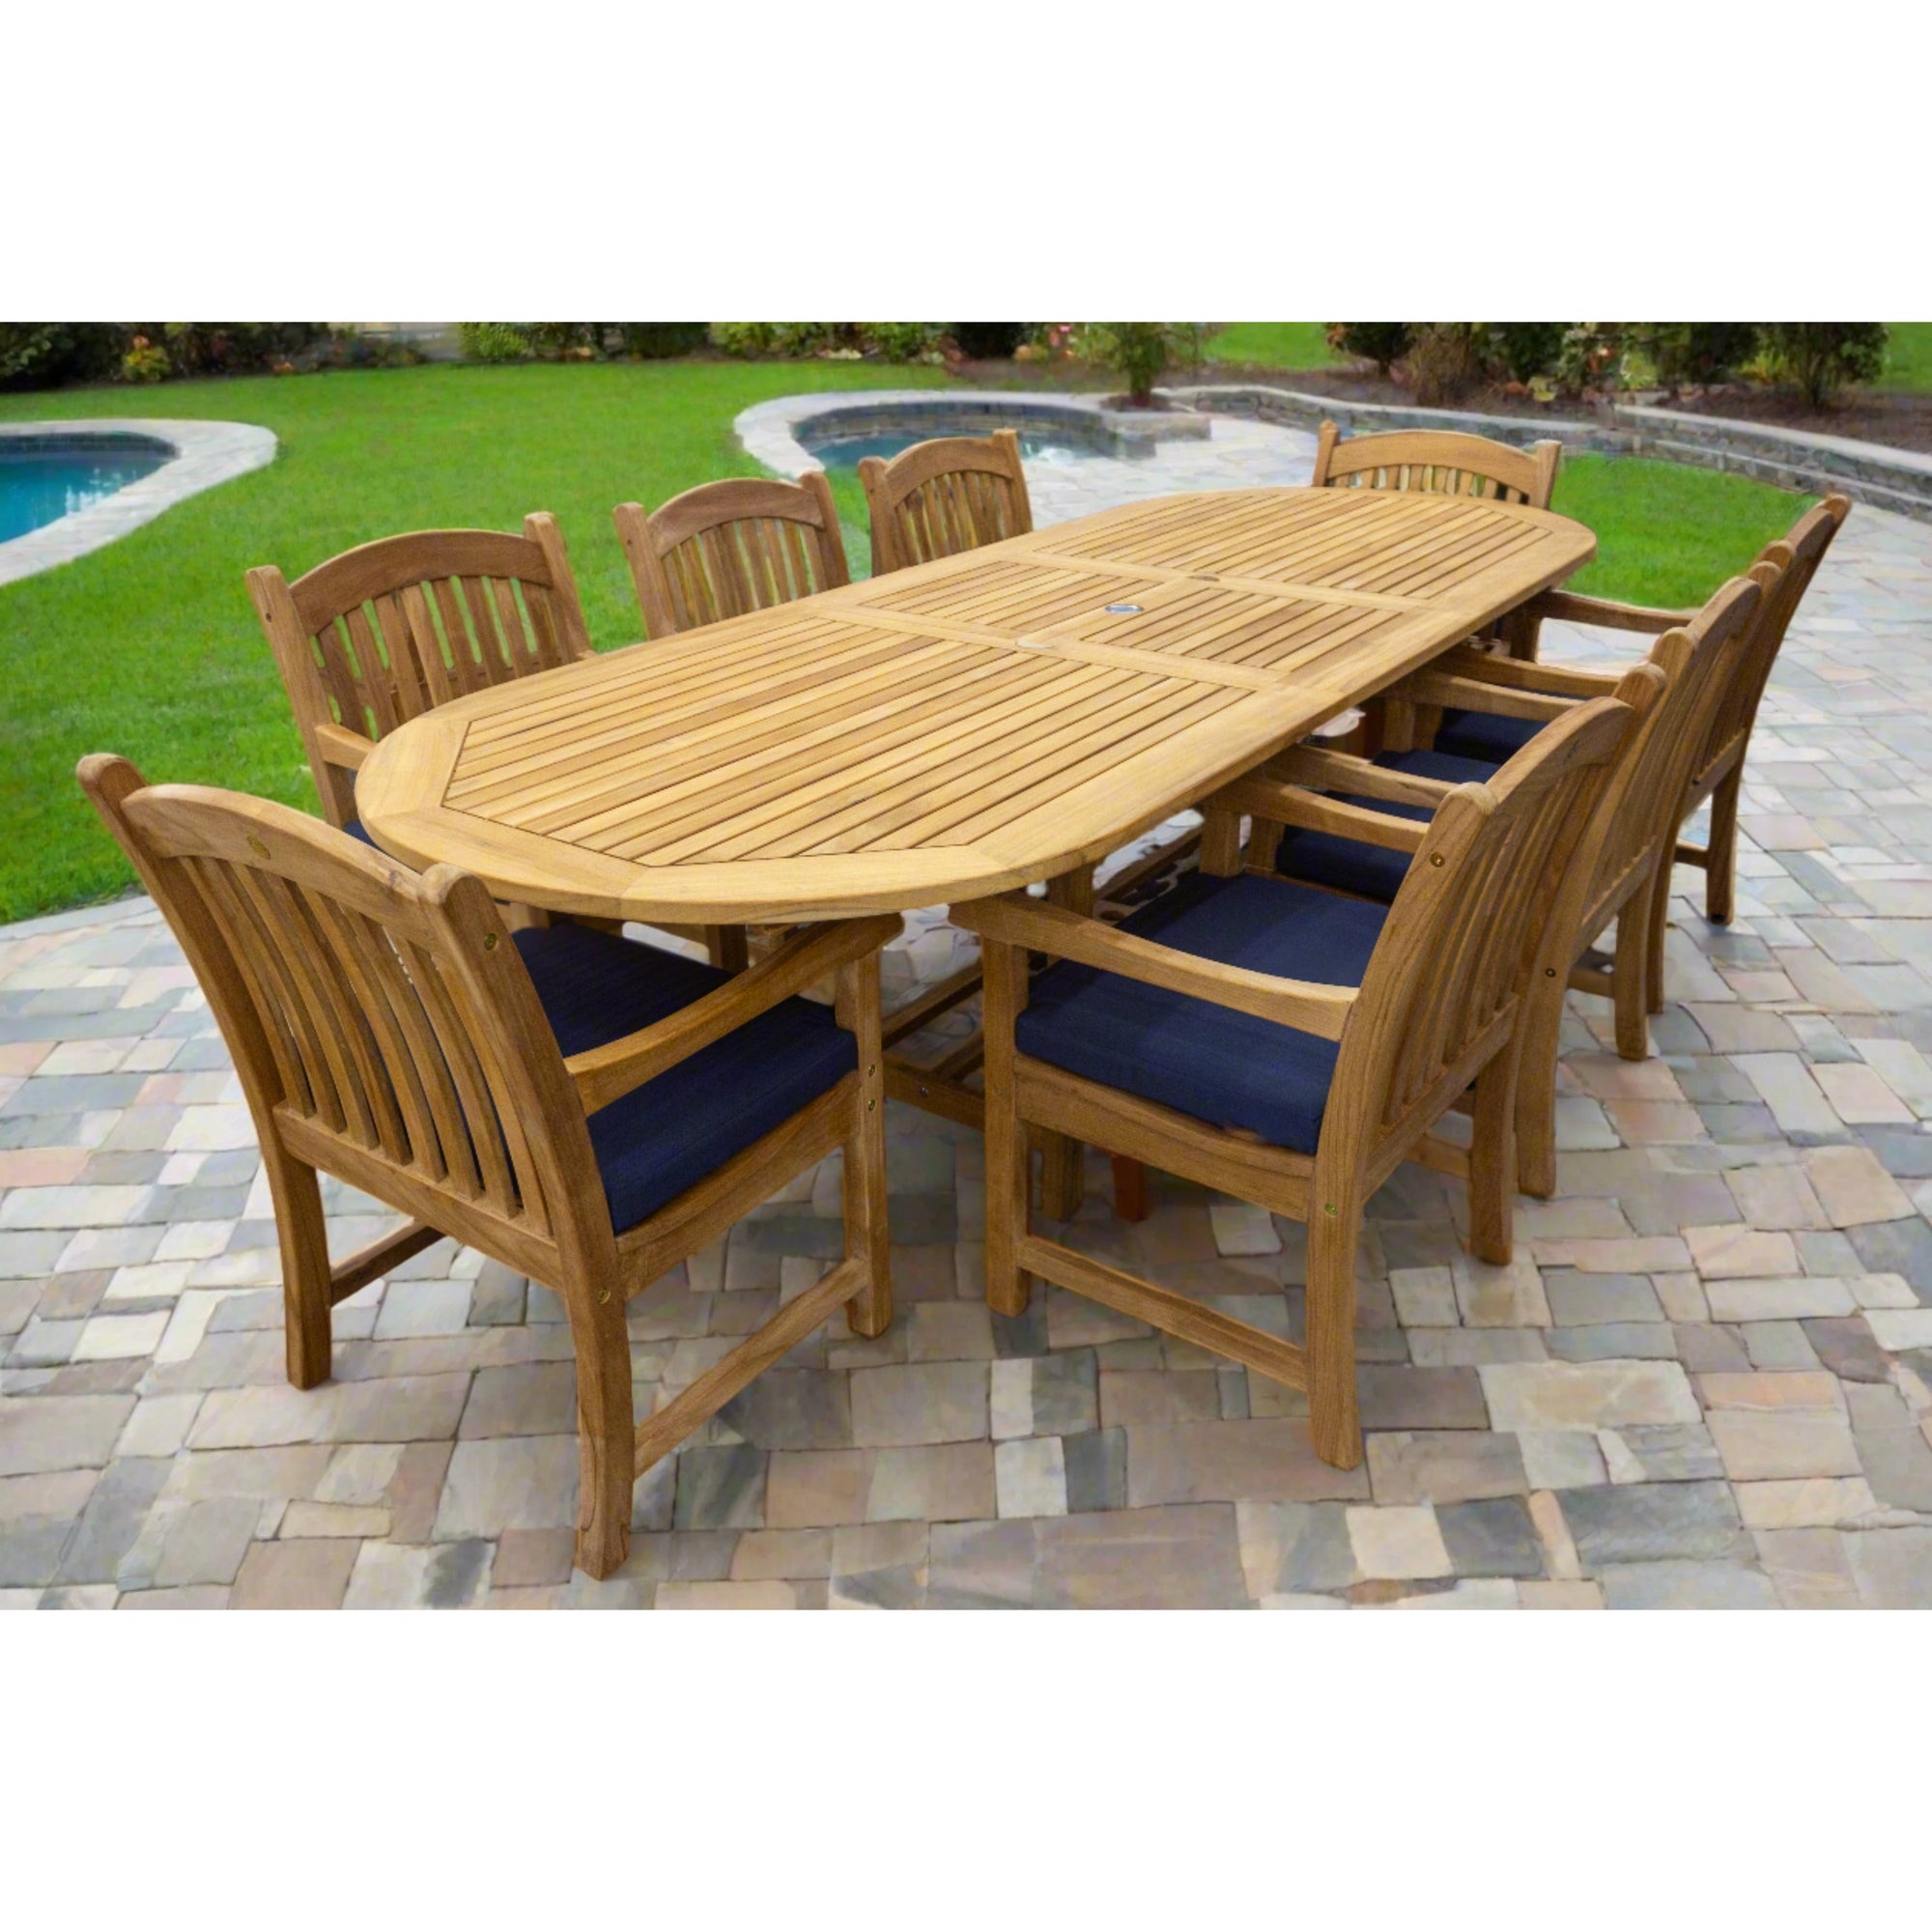 Yacht Teak 7pc Outdoor Dining Set (Teak Oval Extendable Banquet Table 96-120" with 6 Teak Chairs)